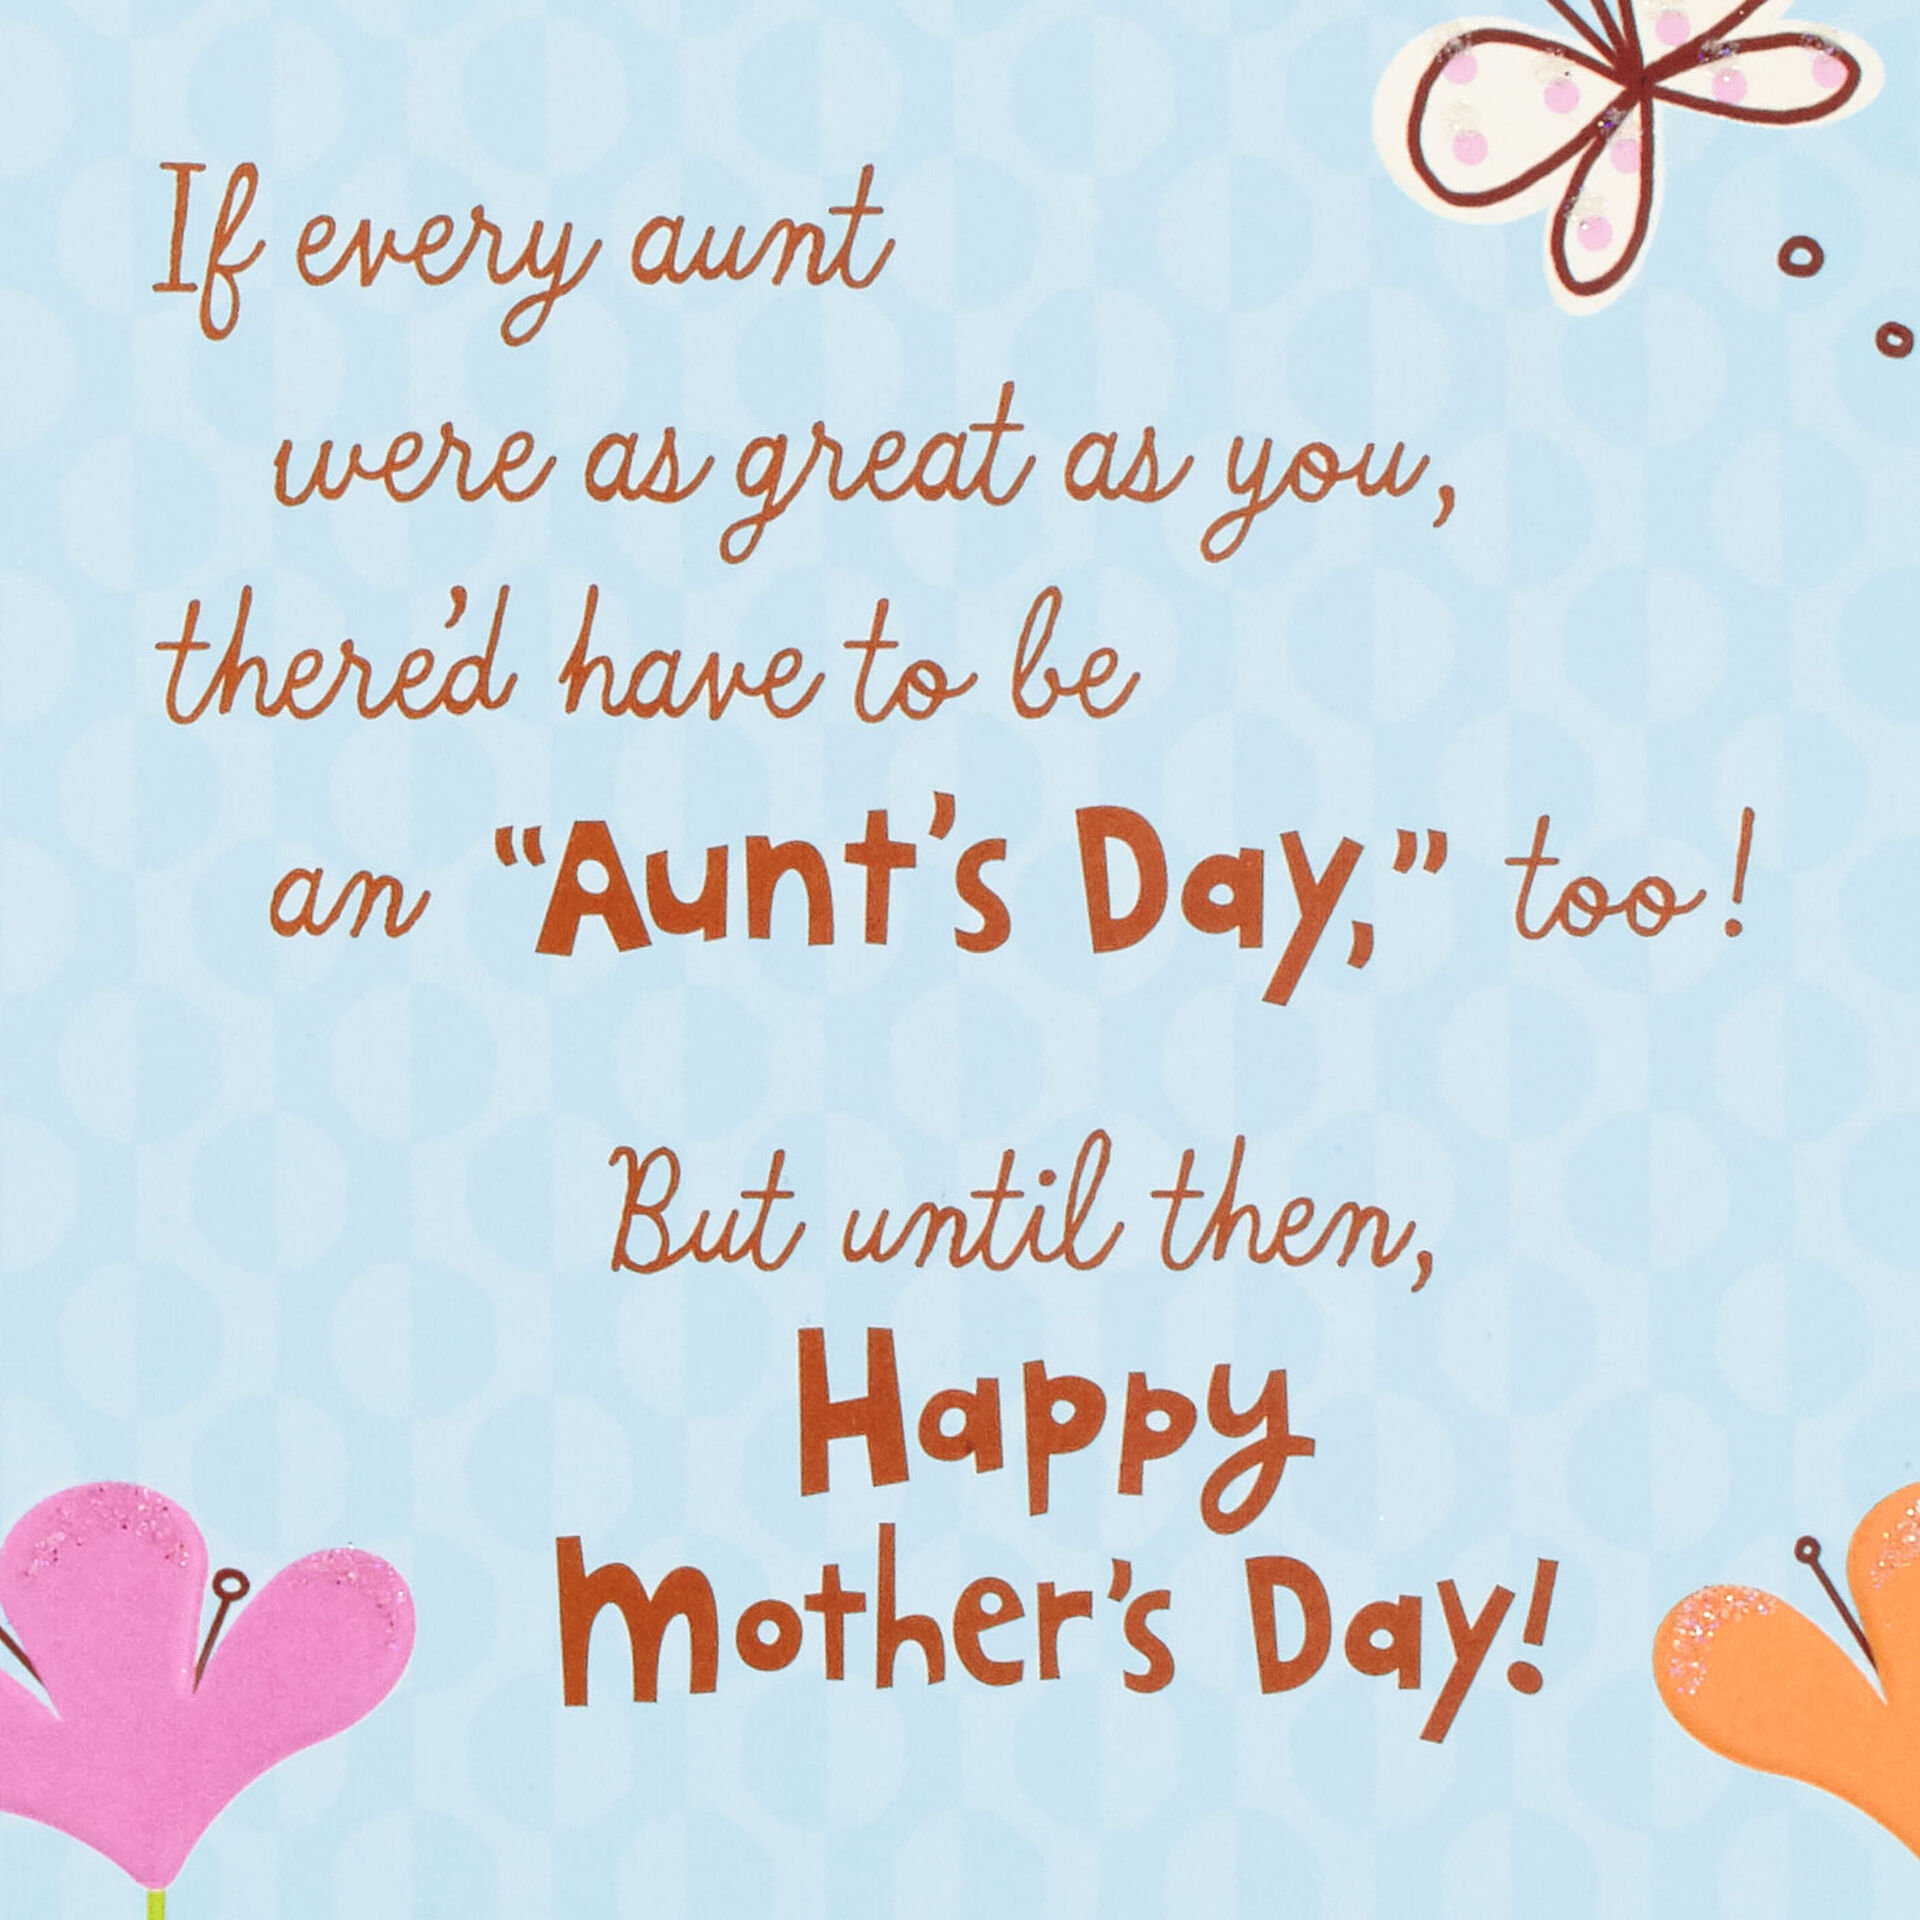 You're a Great Aunt Mother's Day Card - Greeting Cards - Hallmark